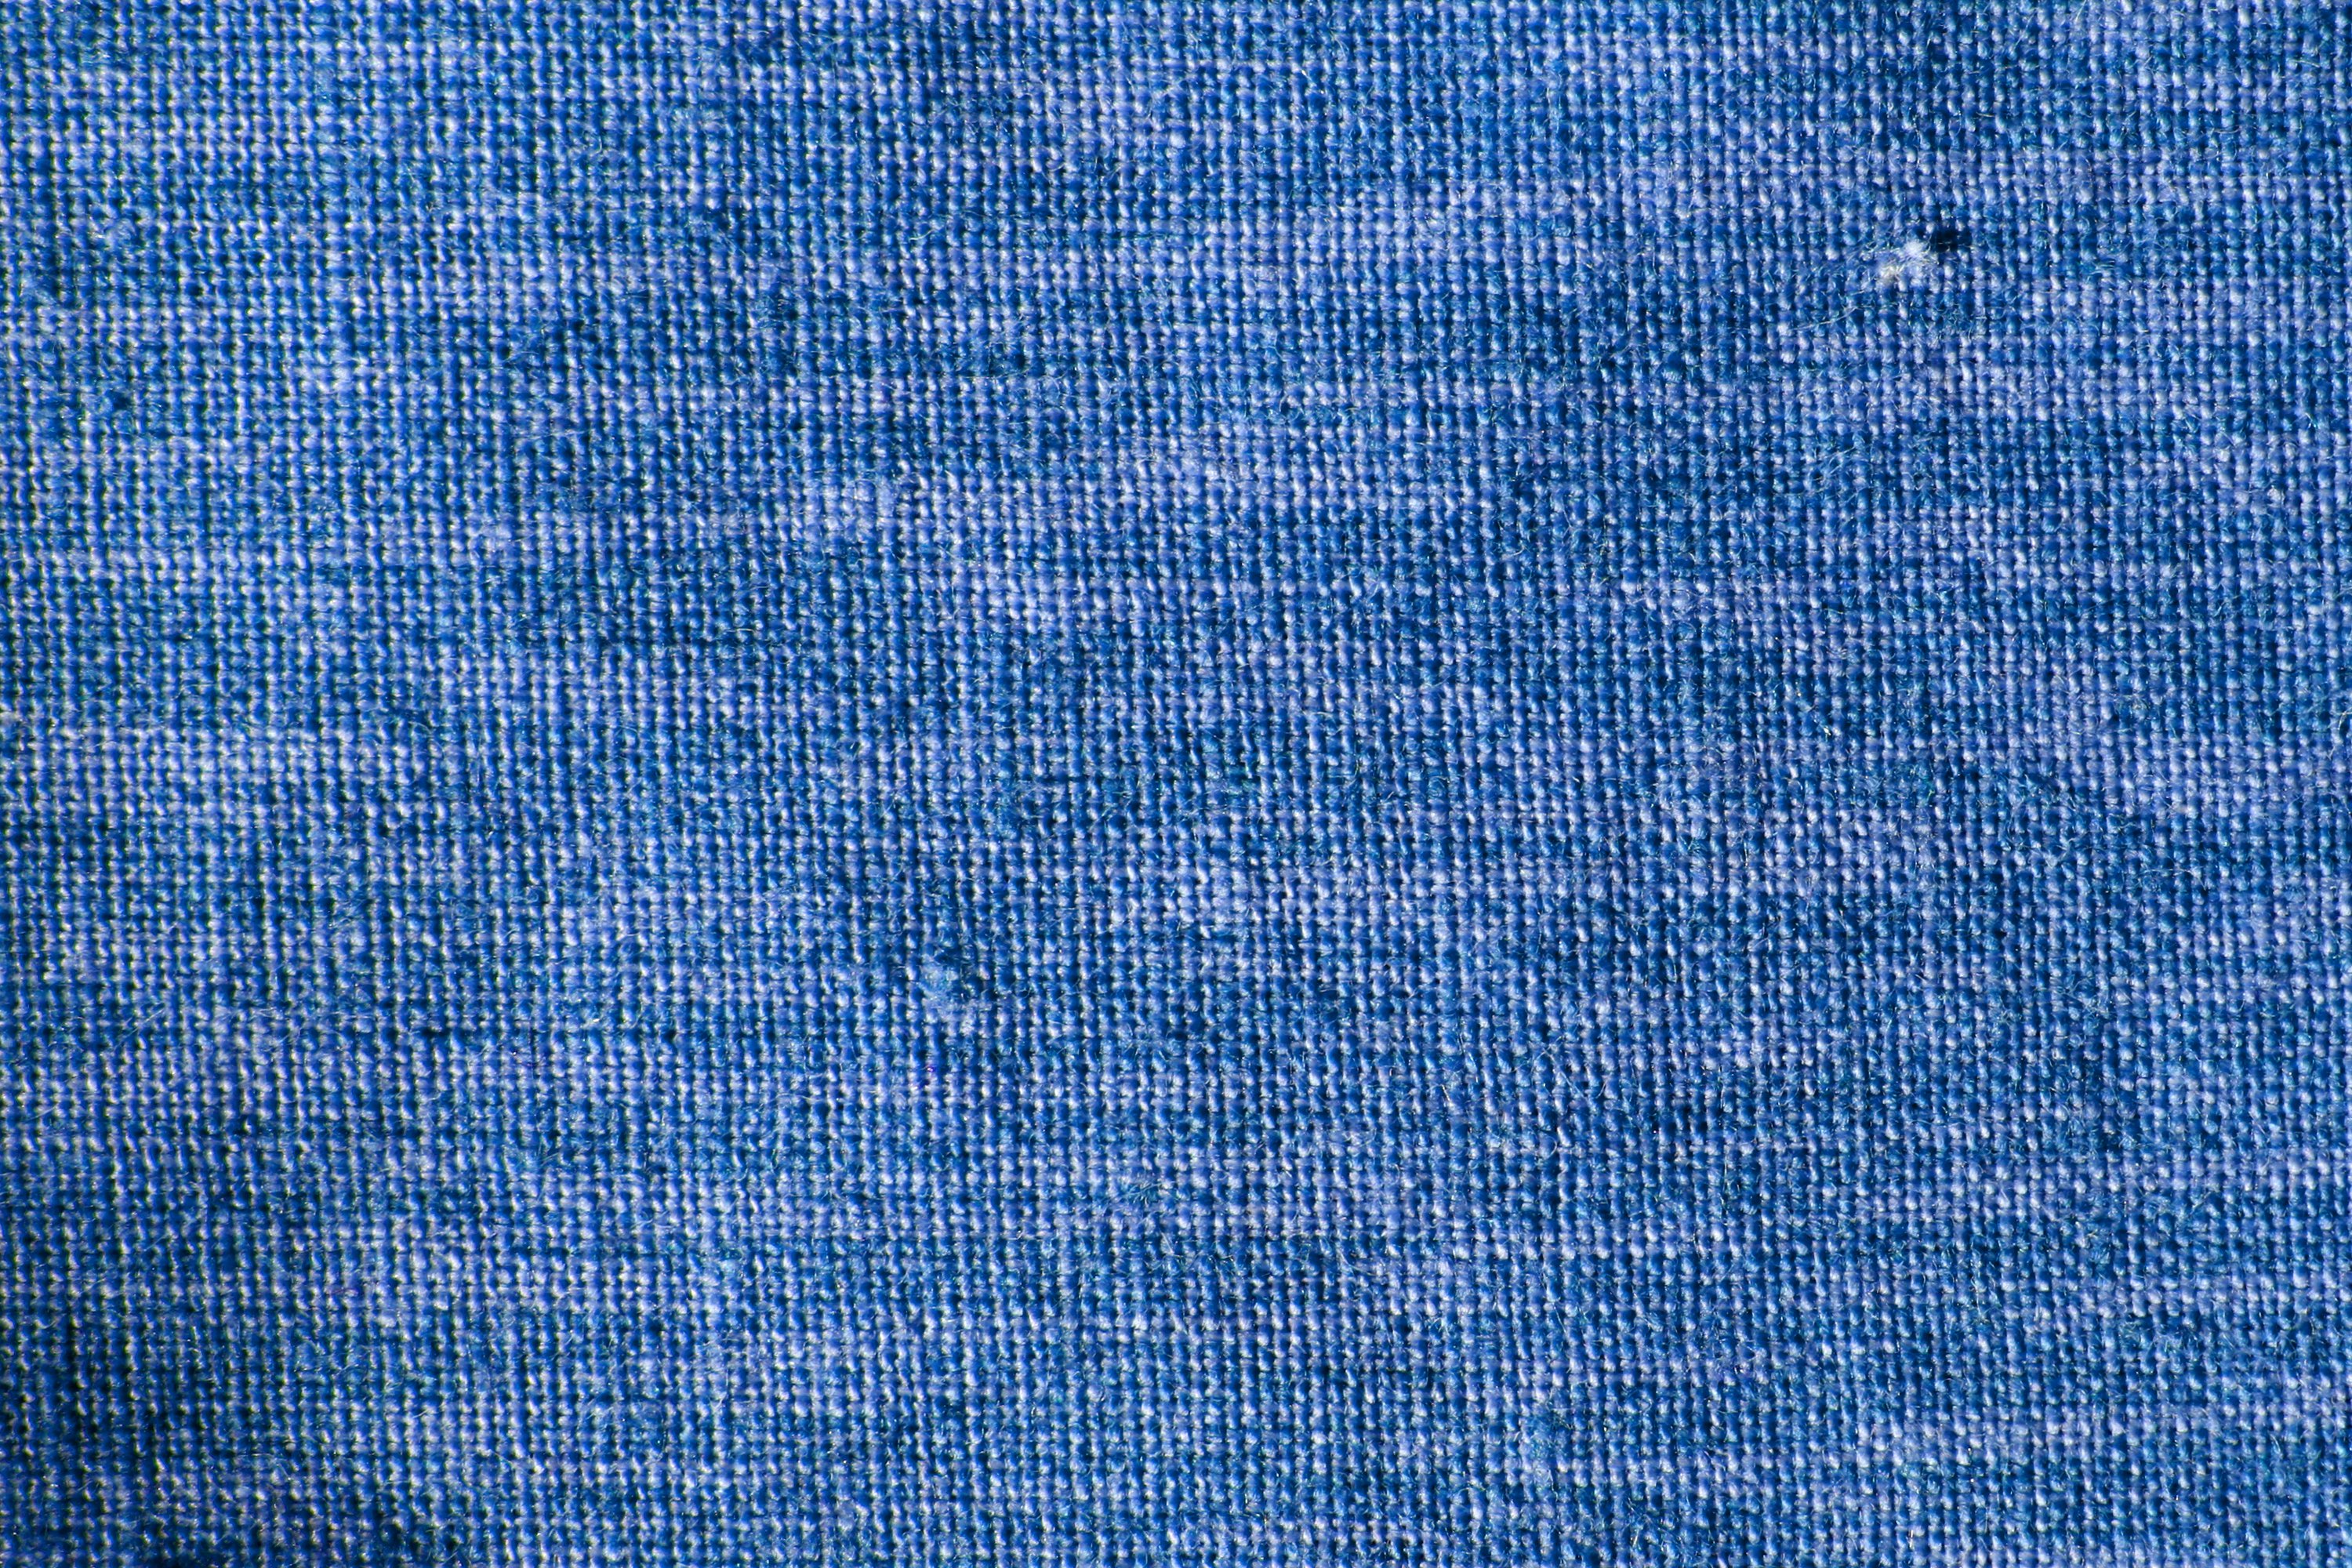 Blue Woven Fabric Close Up Texture Picture | Free Photograph | Photos ...